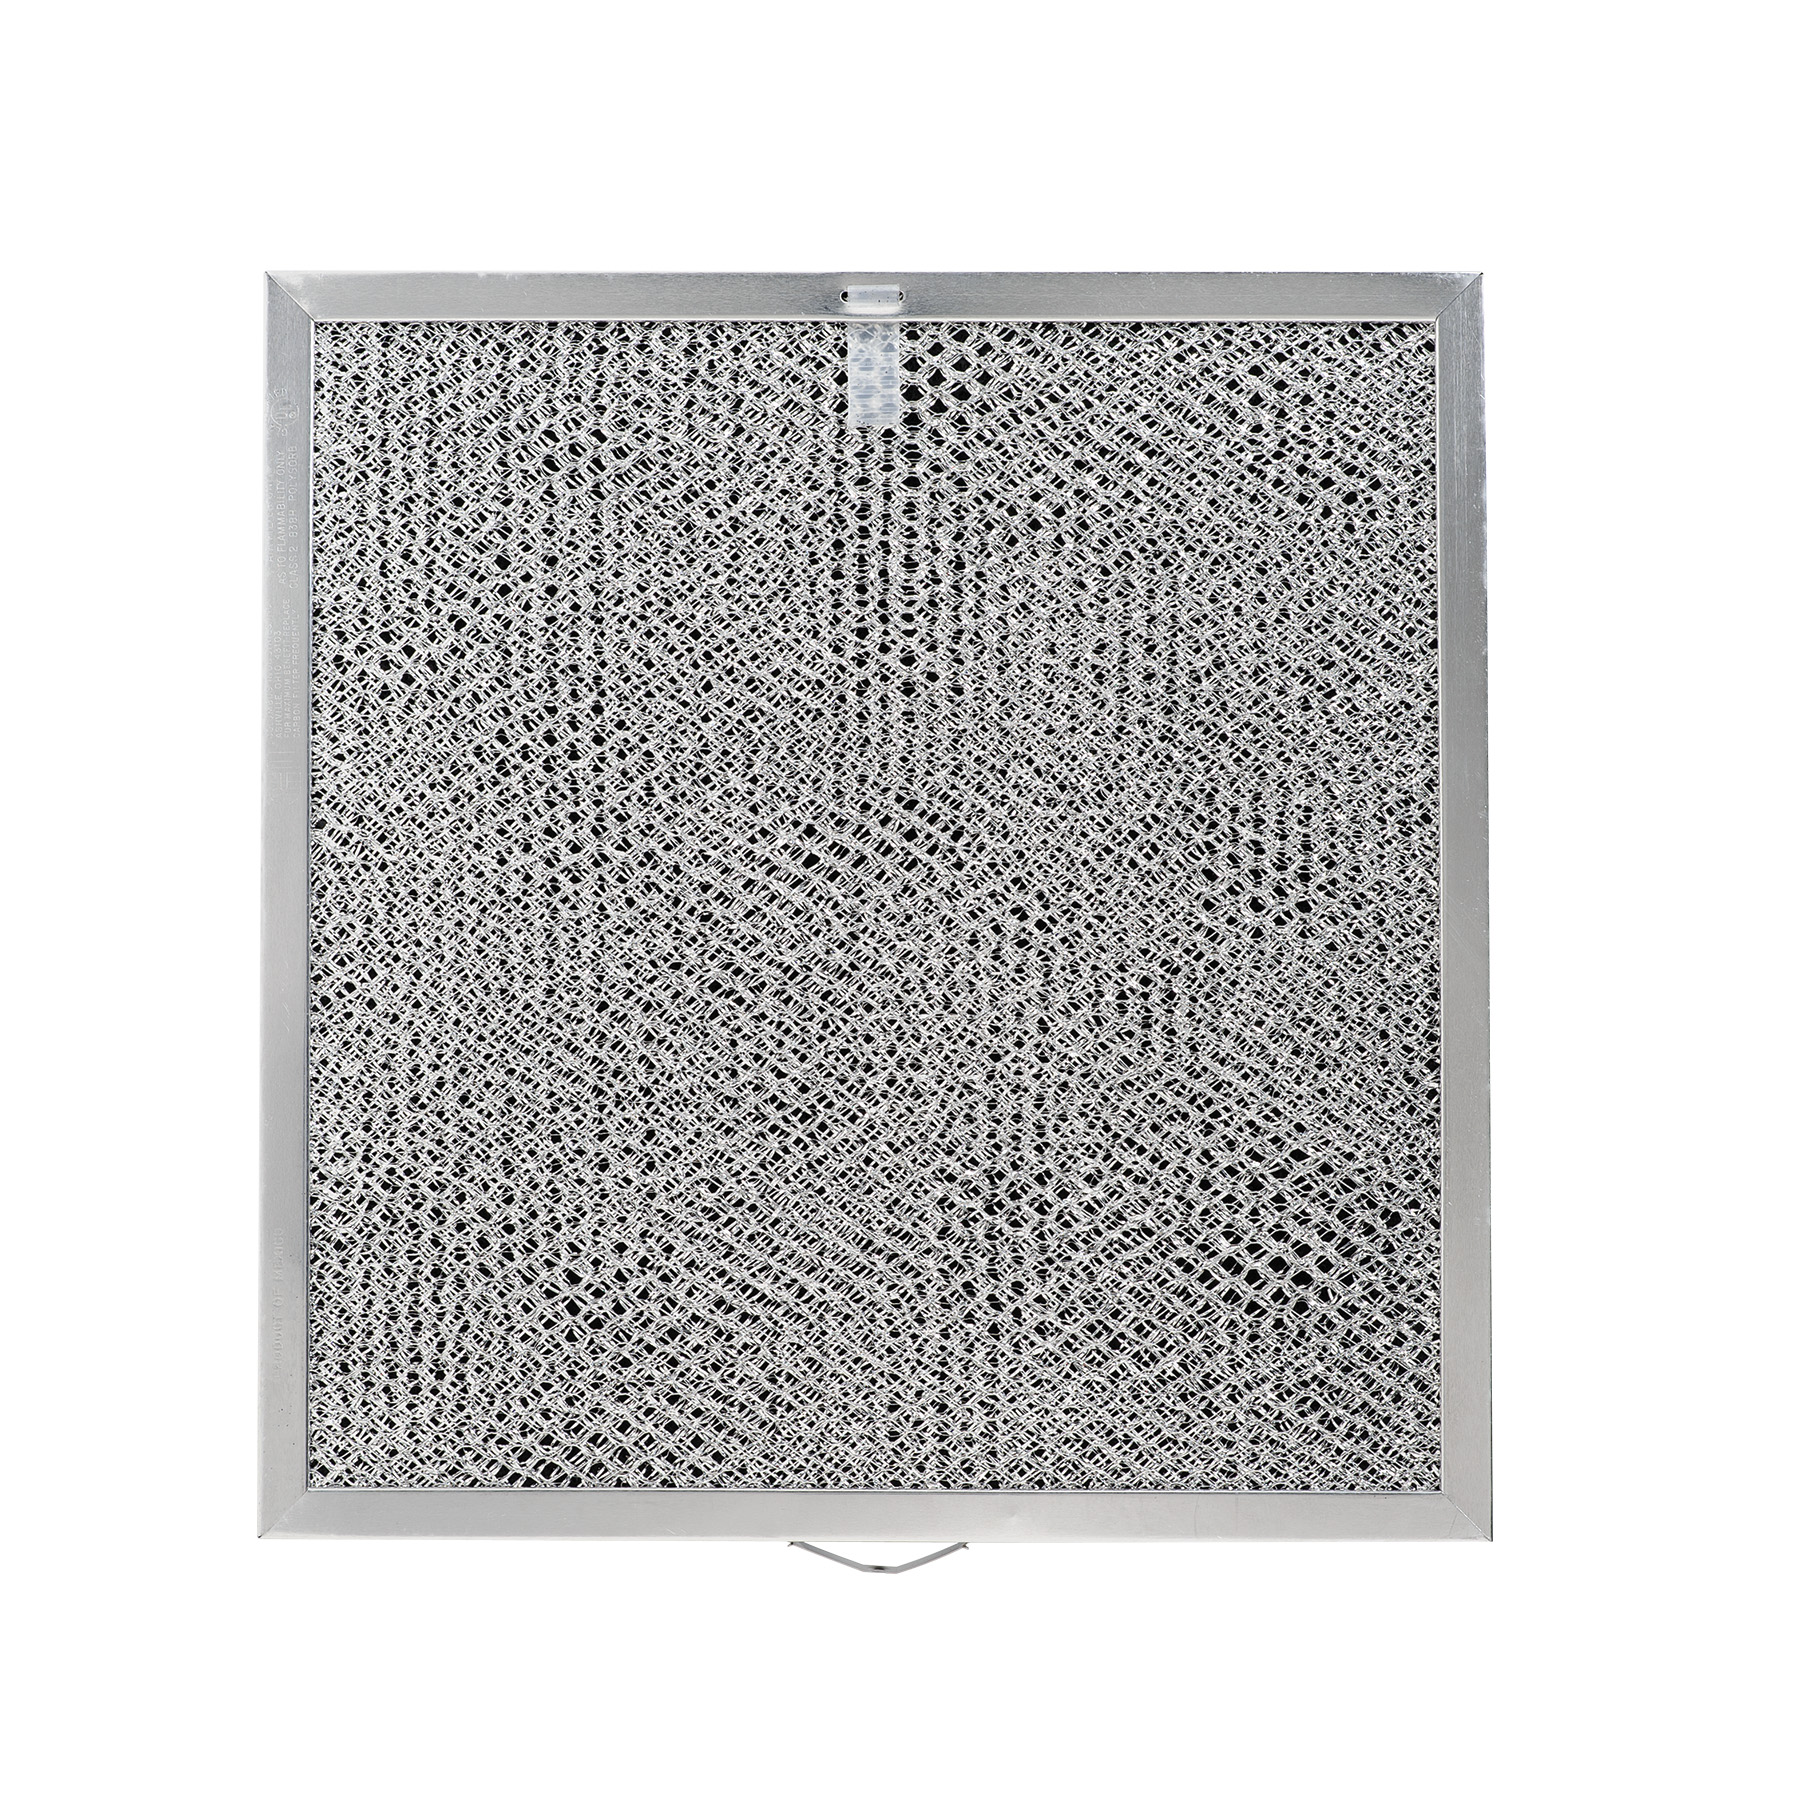 What Is A Range Hood Filter